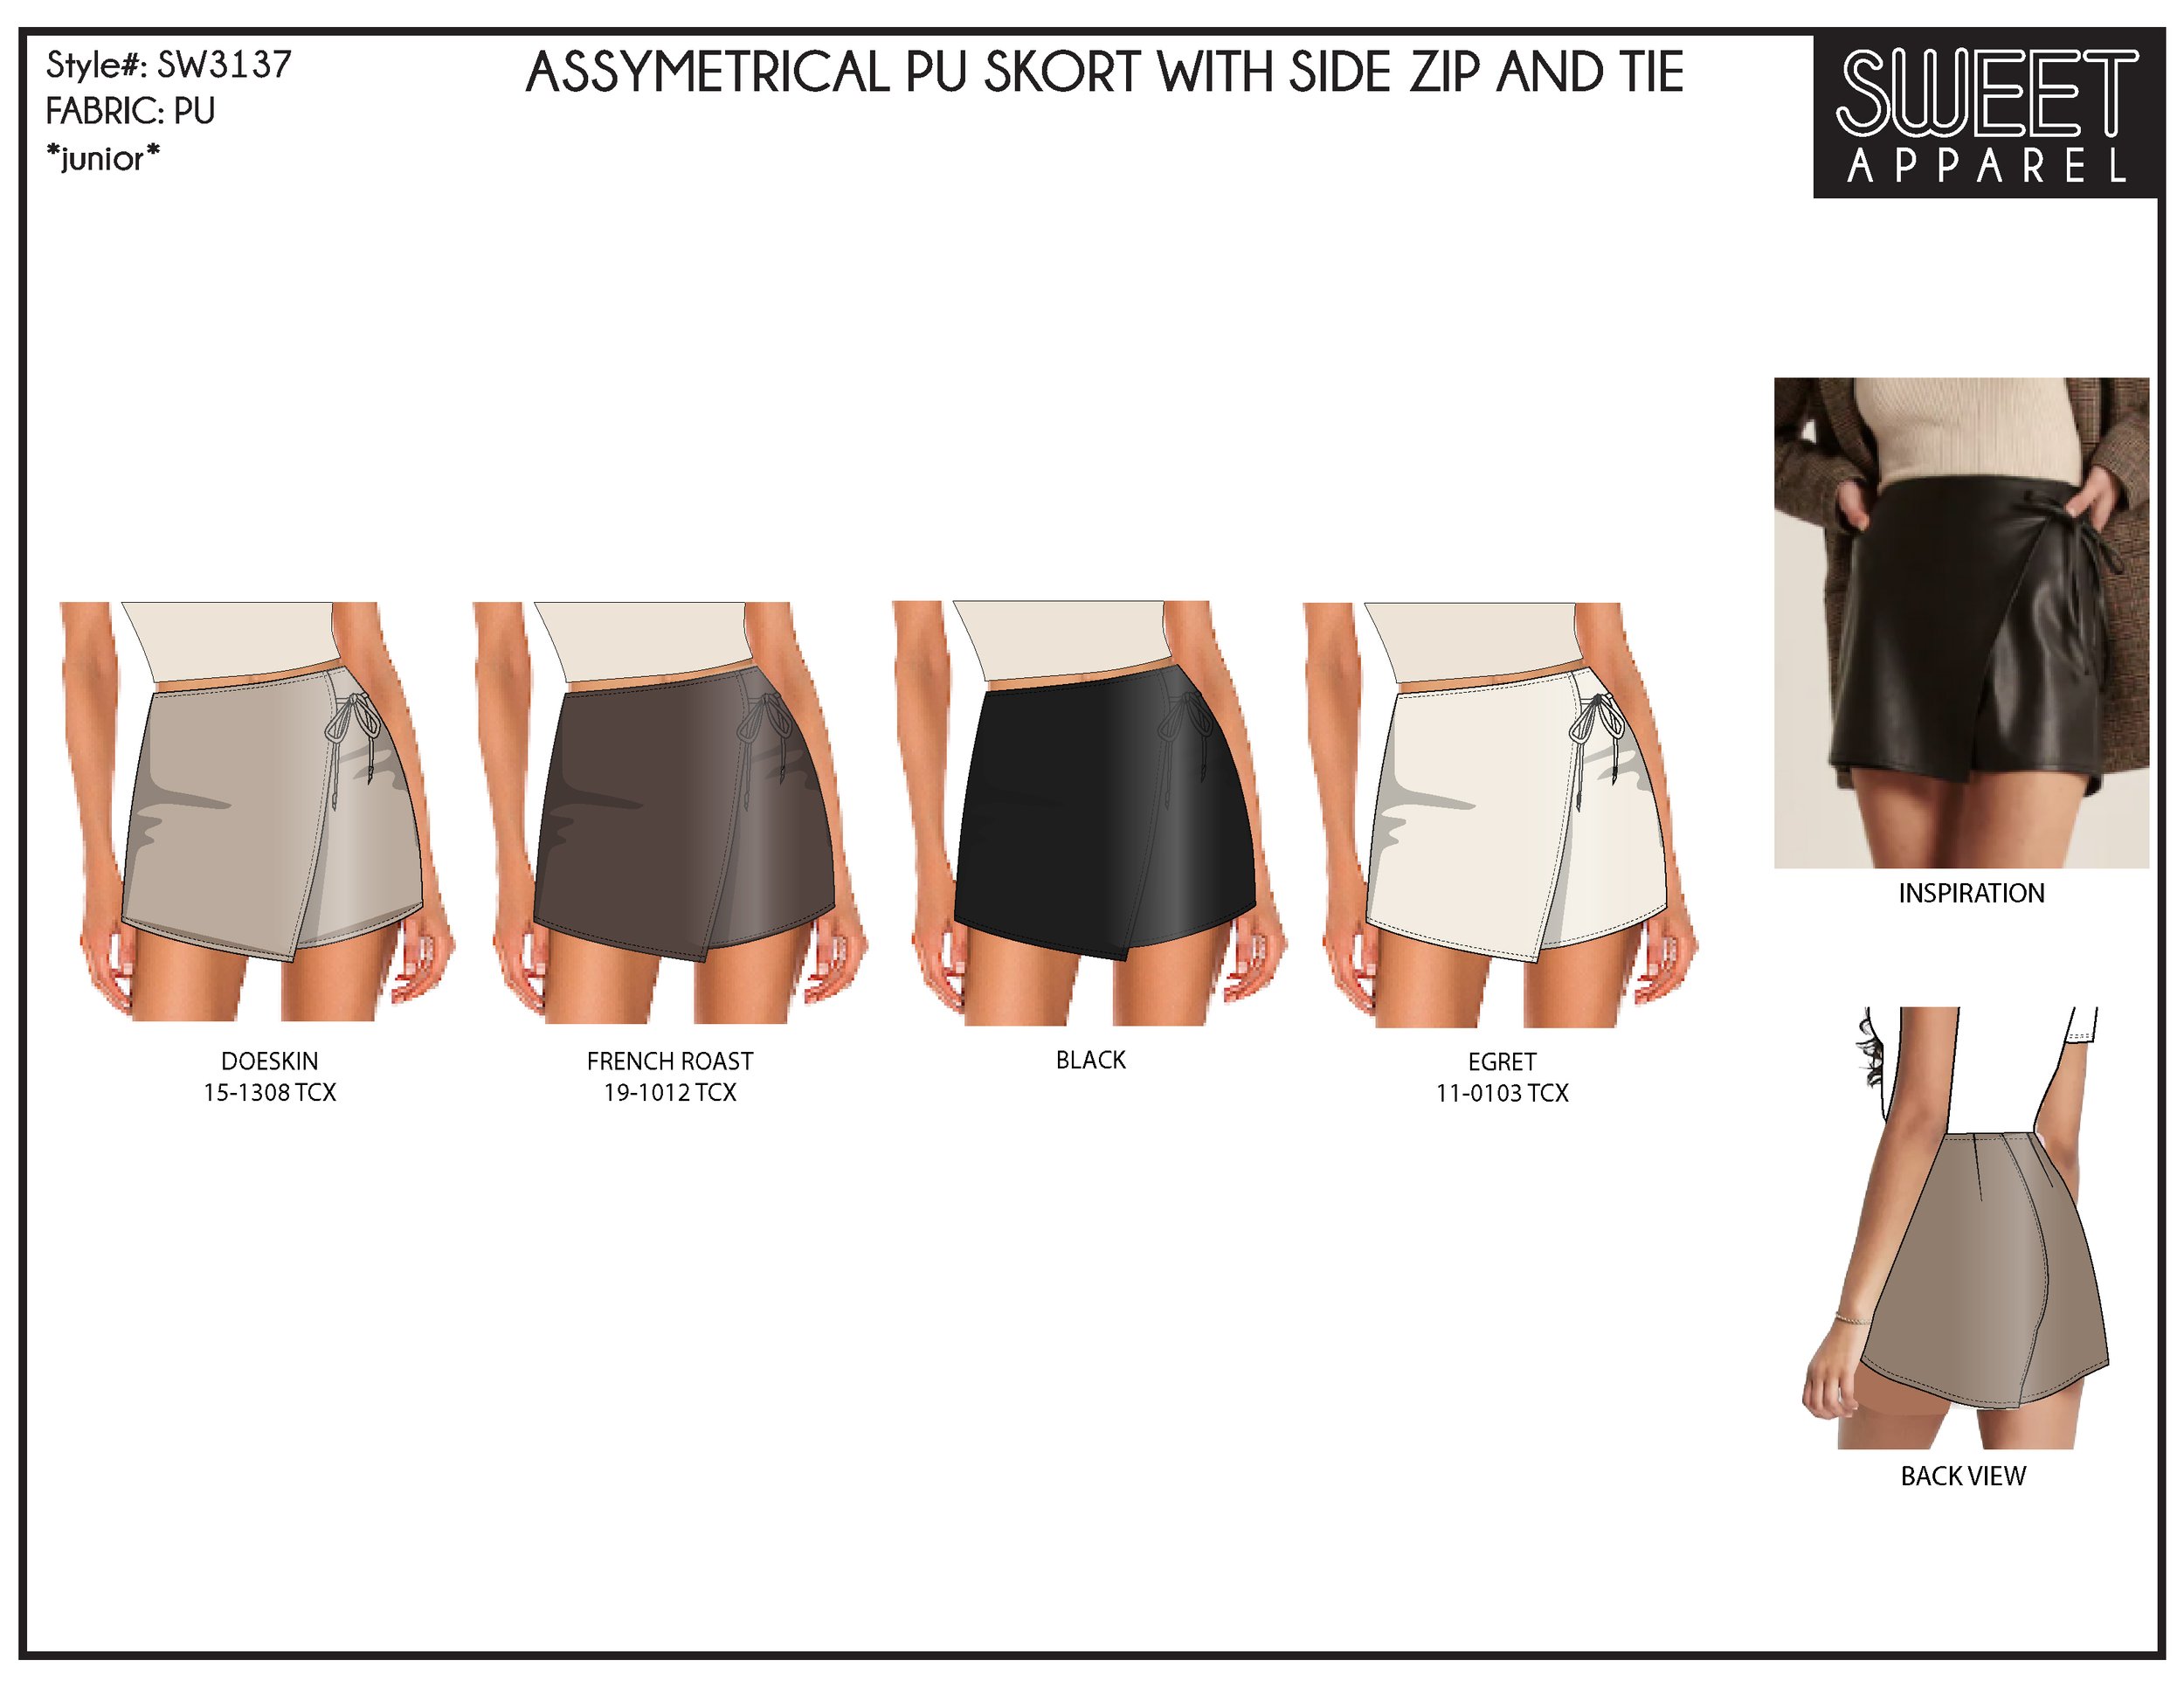 SW3137 - ASSYMETRICAL PU SKORT WITH SIDE ZIP AND TIE-MM-01.jpg